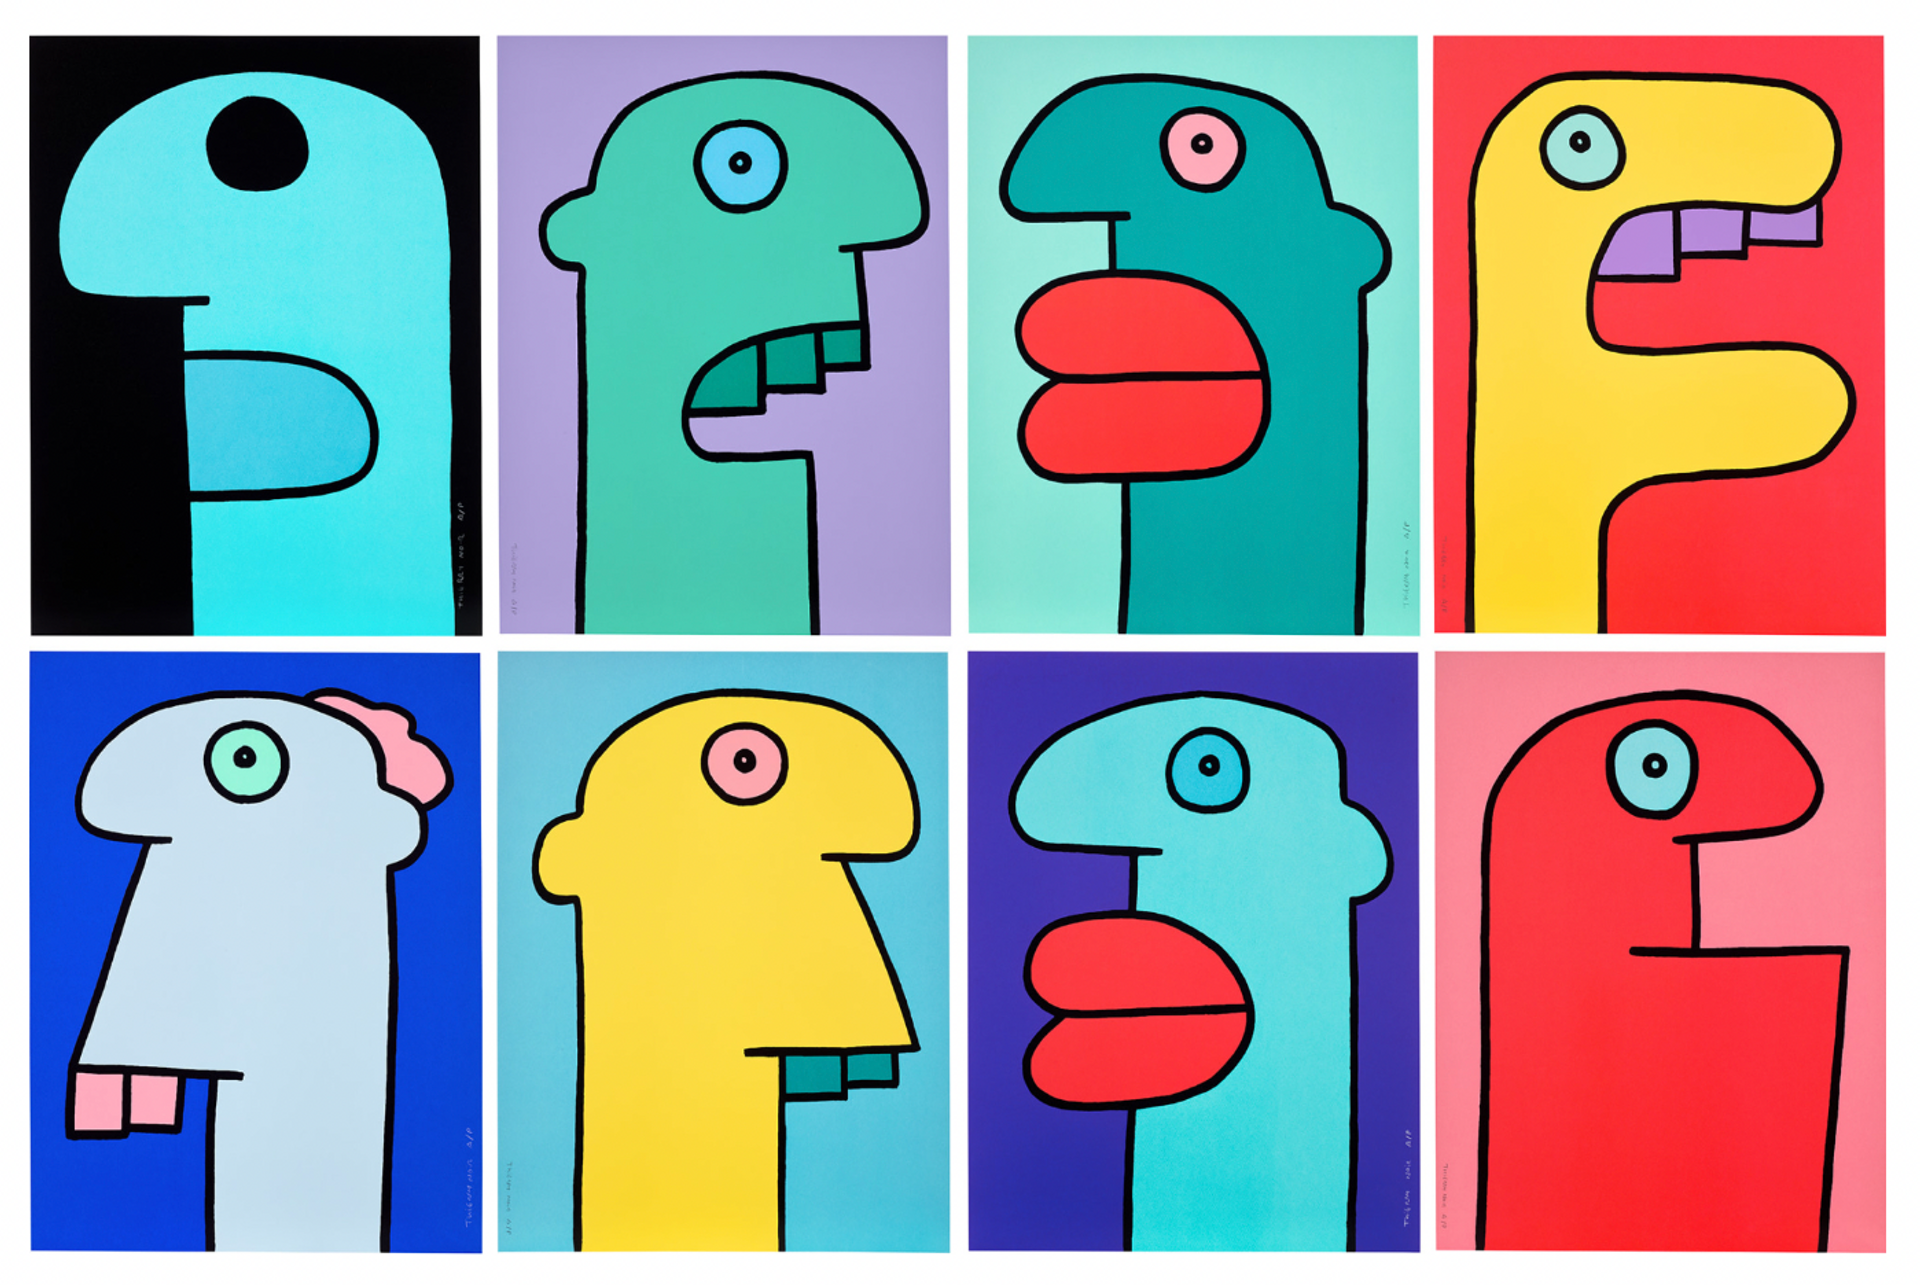 Eight screenprints by Thierry Noir depicting cartoon heads in different bright colour-ways.